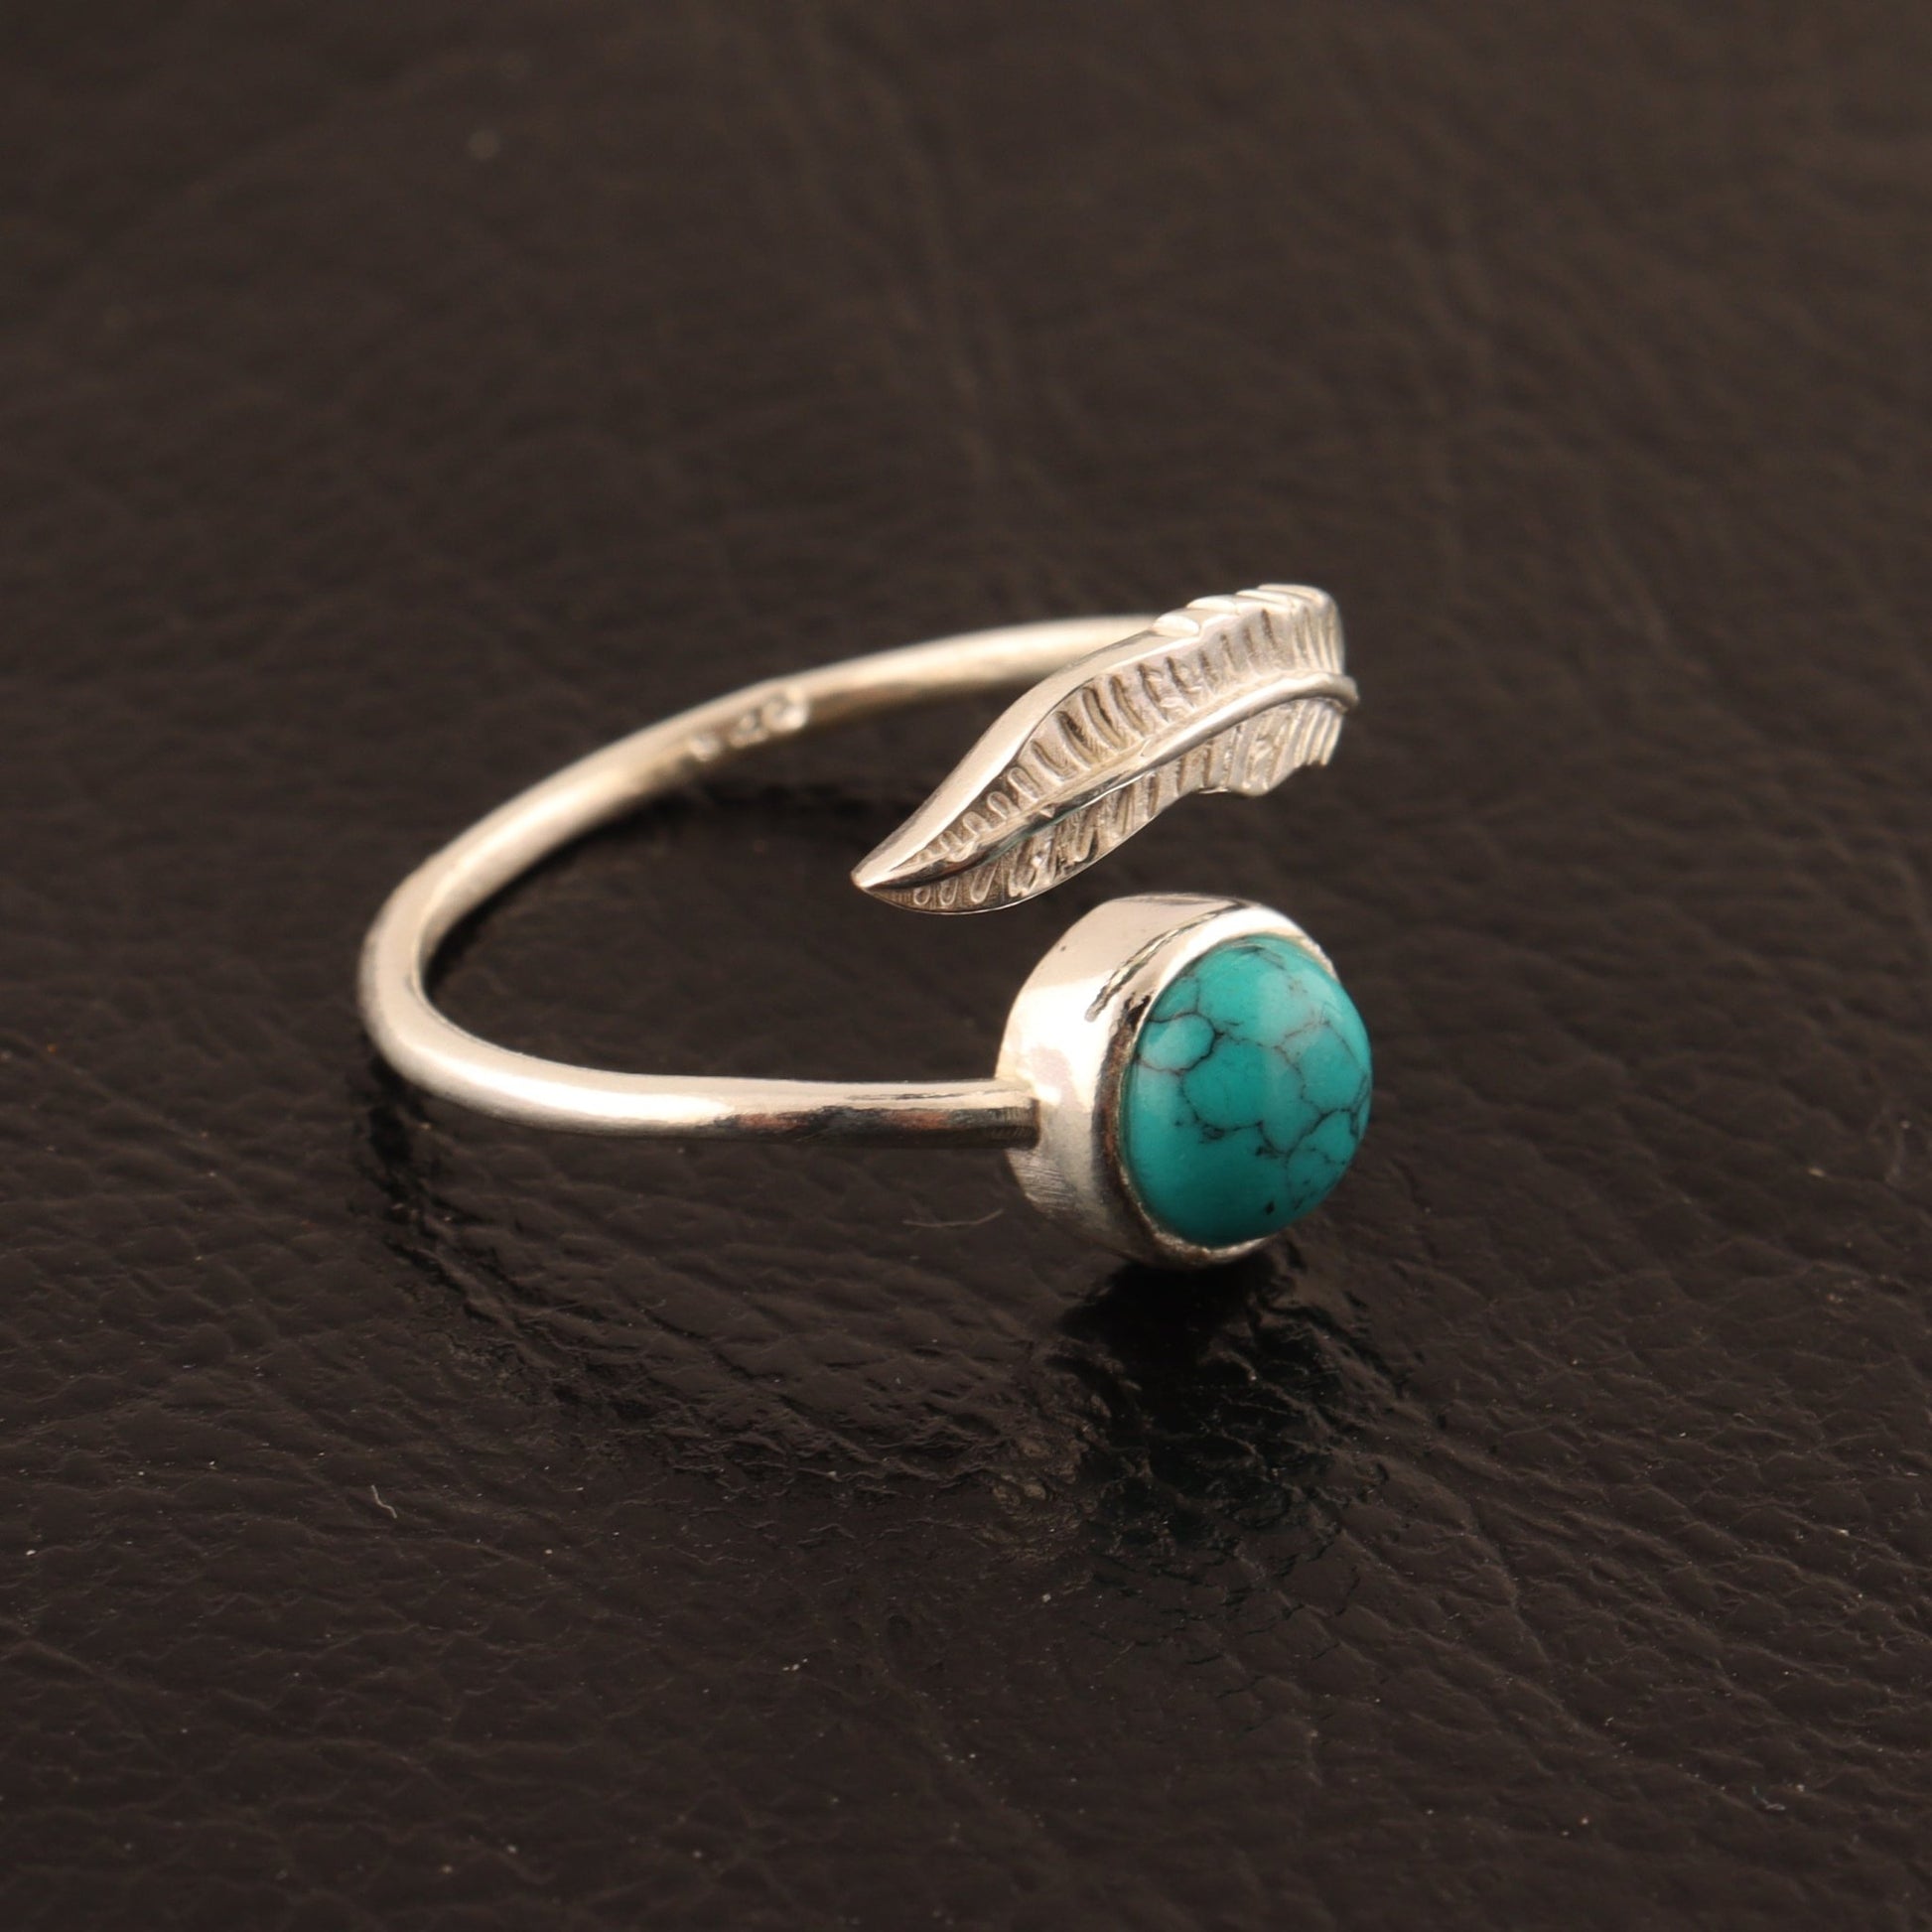 Artisan-Crafted Adjustable Sterling Silver Ring with Leaf Motif with a Gem - SBJ